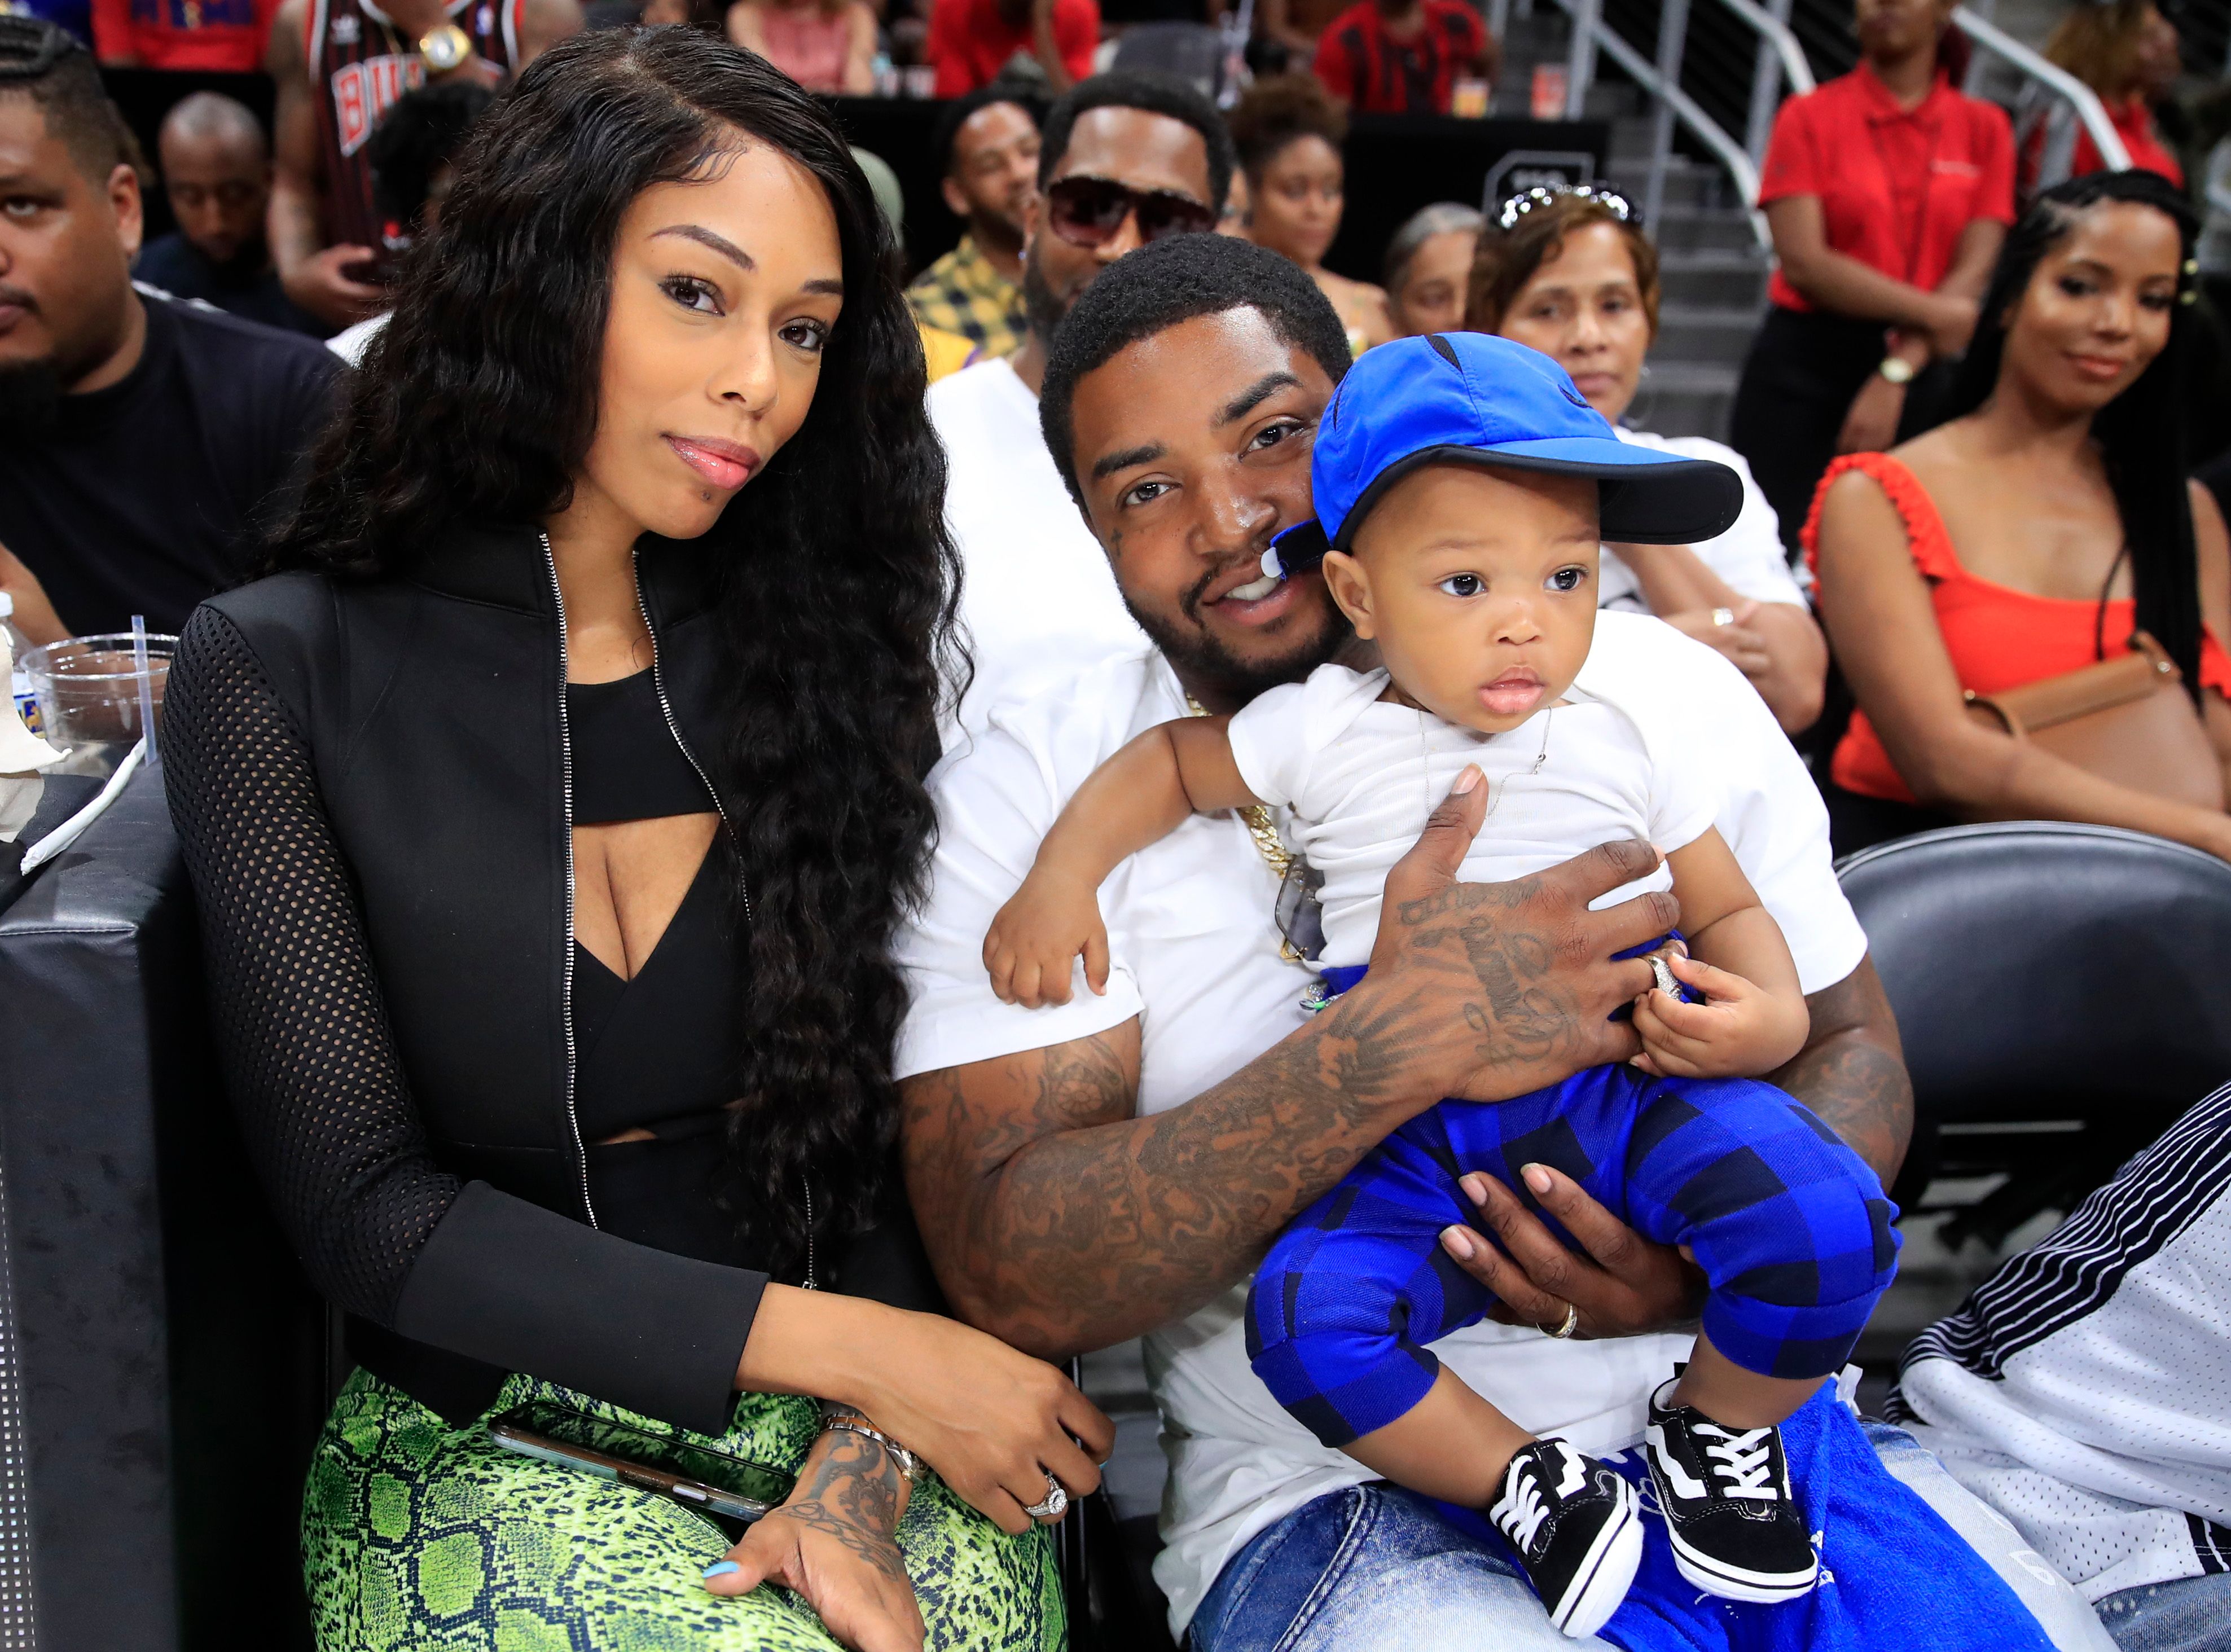 Bambi, Lil Scrappy, and Breland during the game between Power and Trilogy during week three of the BIG3 three on three basketball league at State Farm Arena on July 07, 2019 in Atlanta, Georgia. | Source: Getty Images